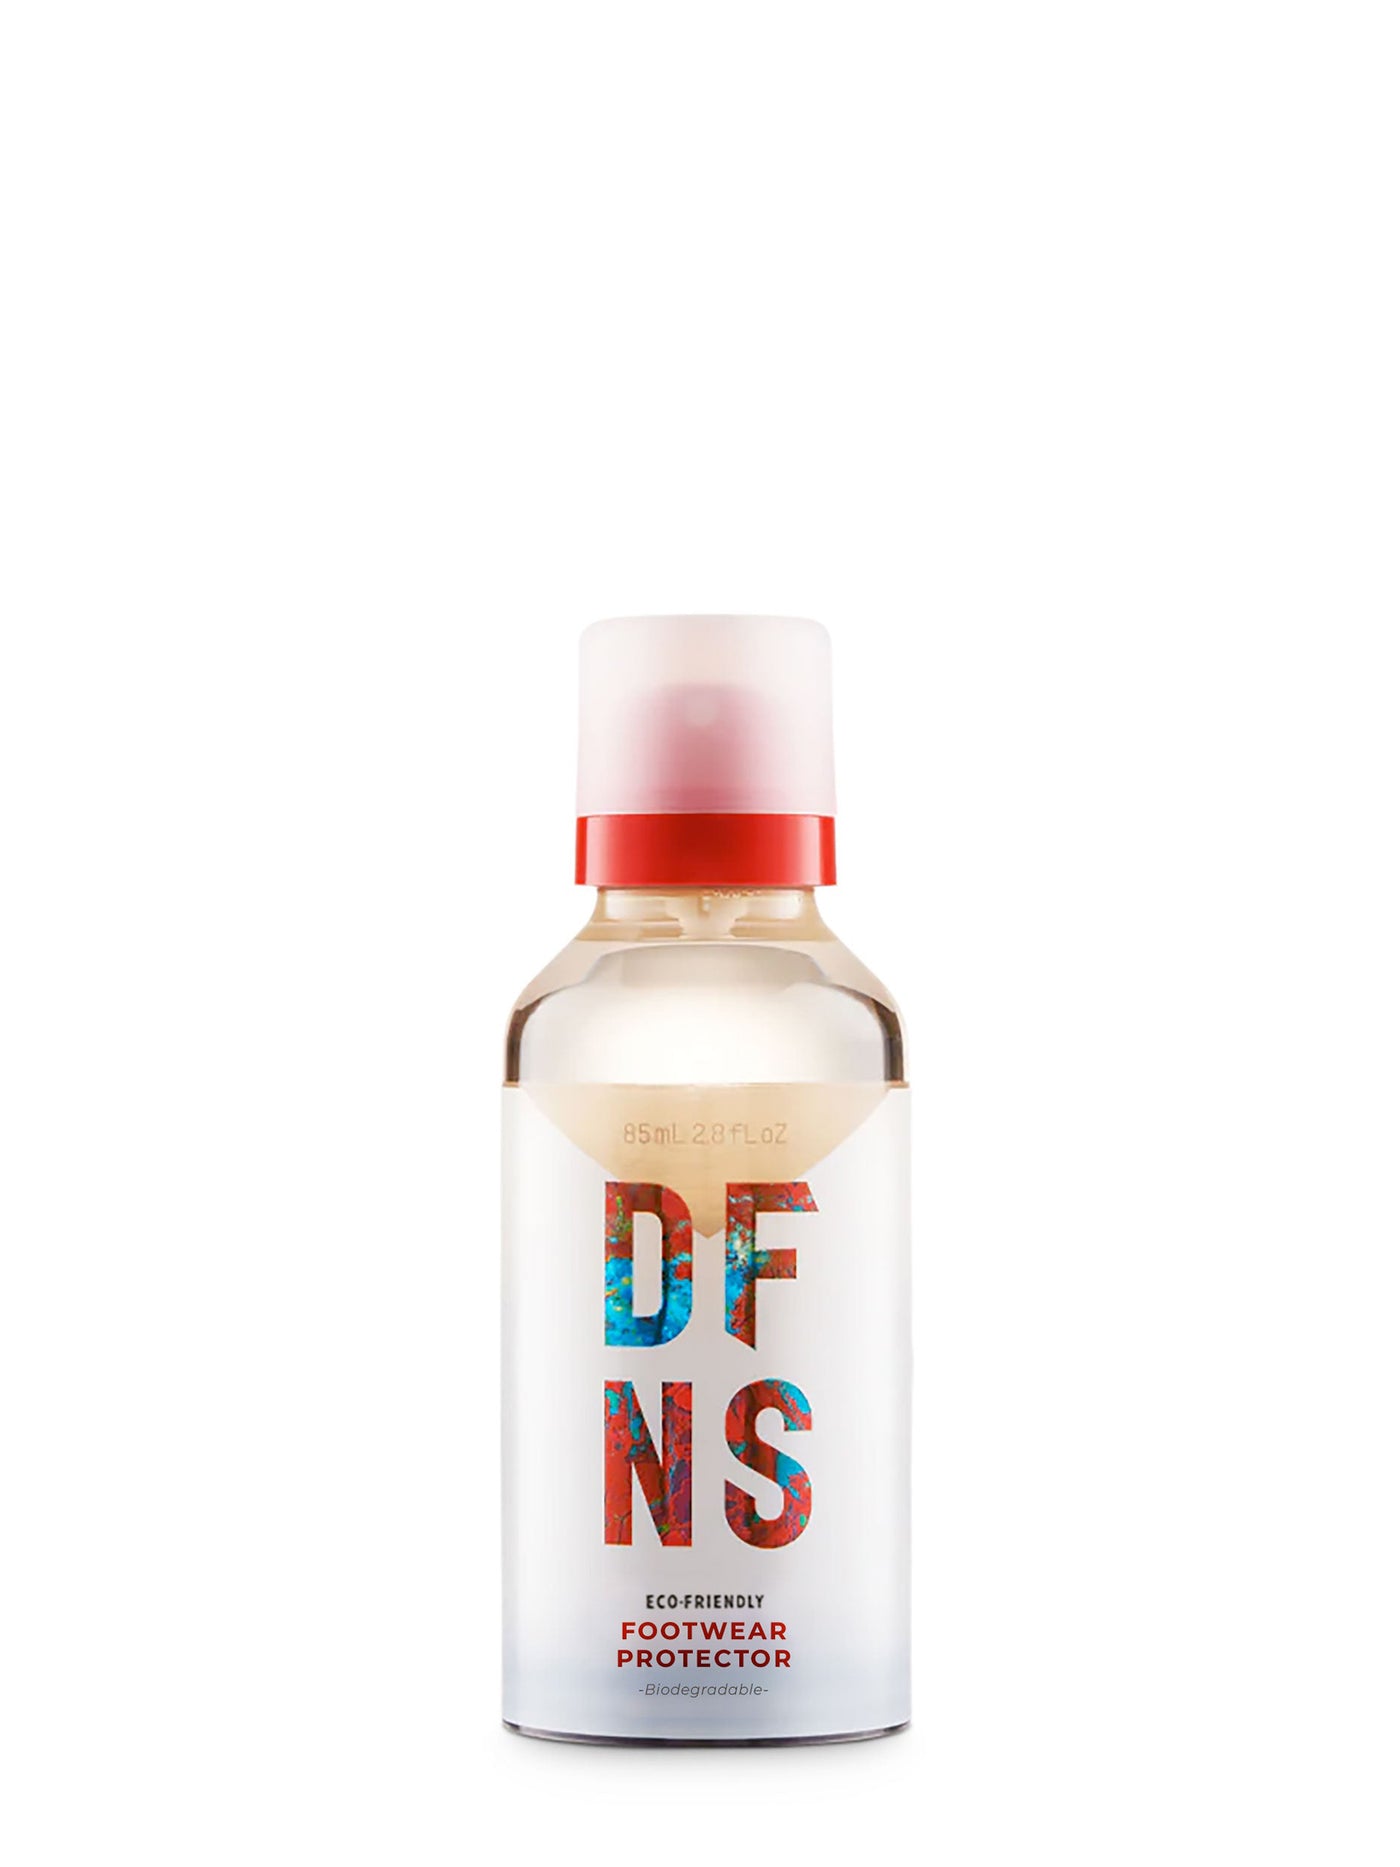 DFNS Footwear Protector - Travel size